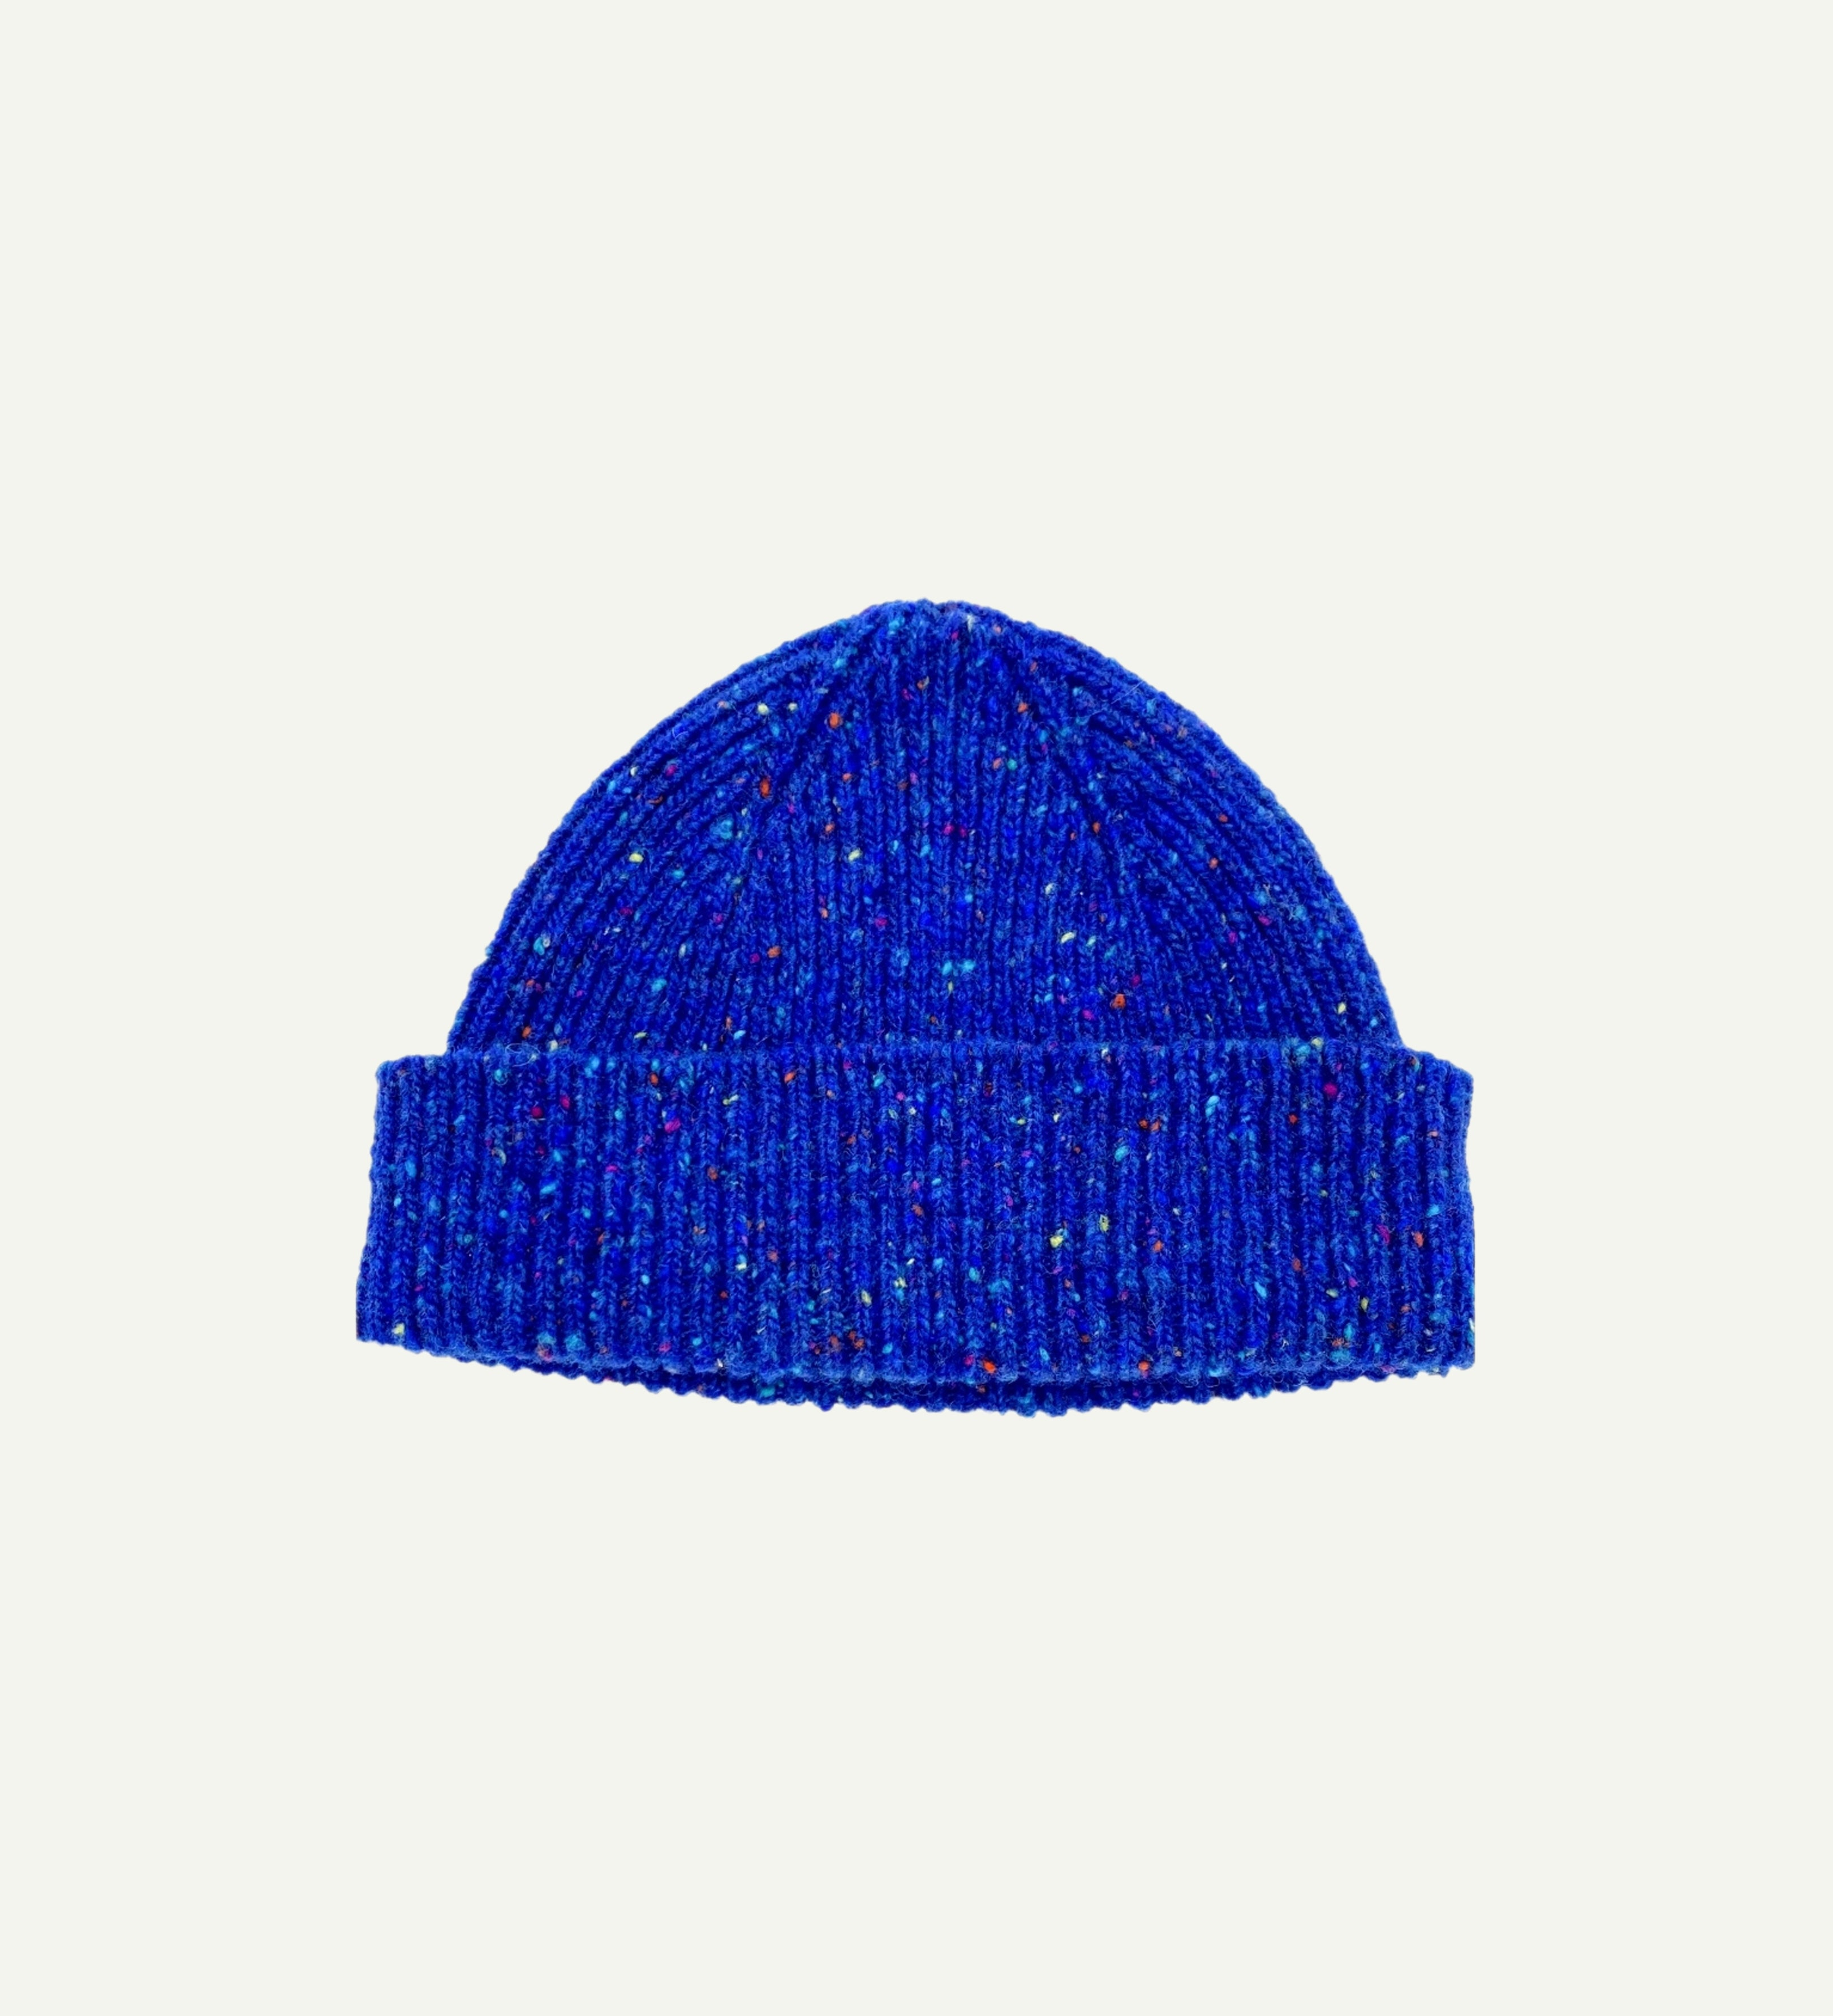  Flat view of Uskees 4003 donegal wool hat in 'ultra blue' . The image clearly shows the adjustable cuff of this bright blue hat.